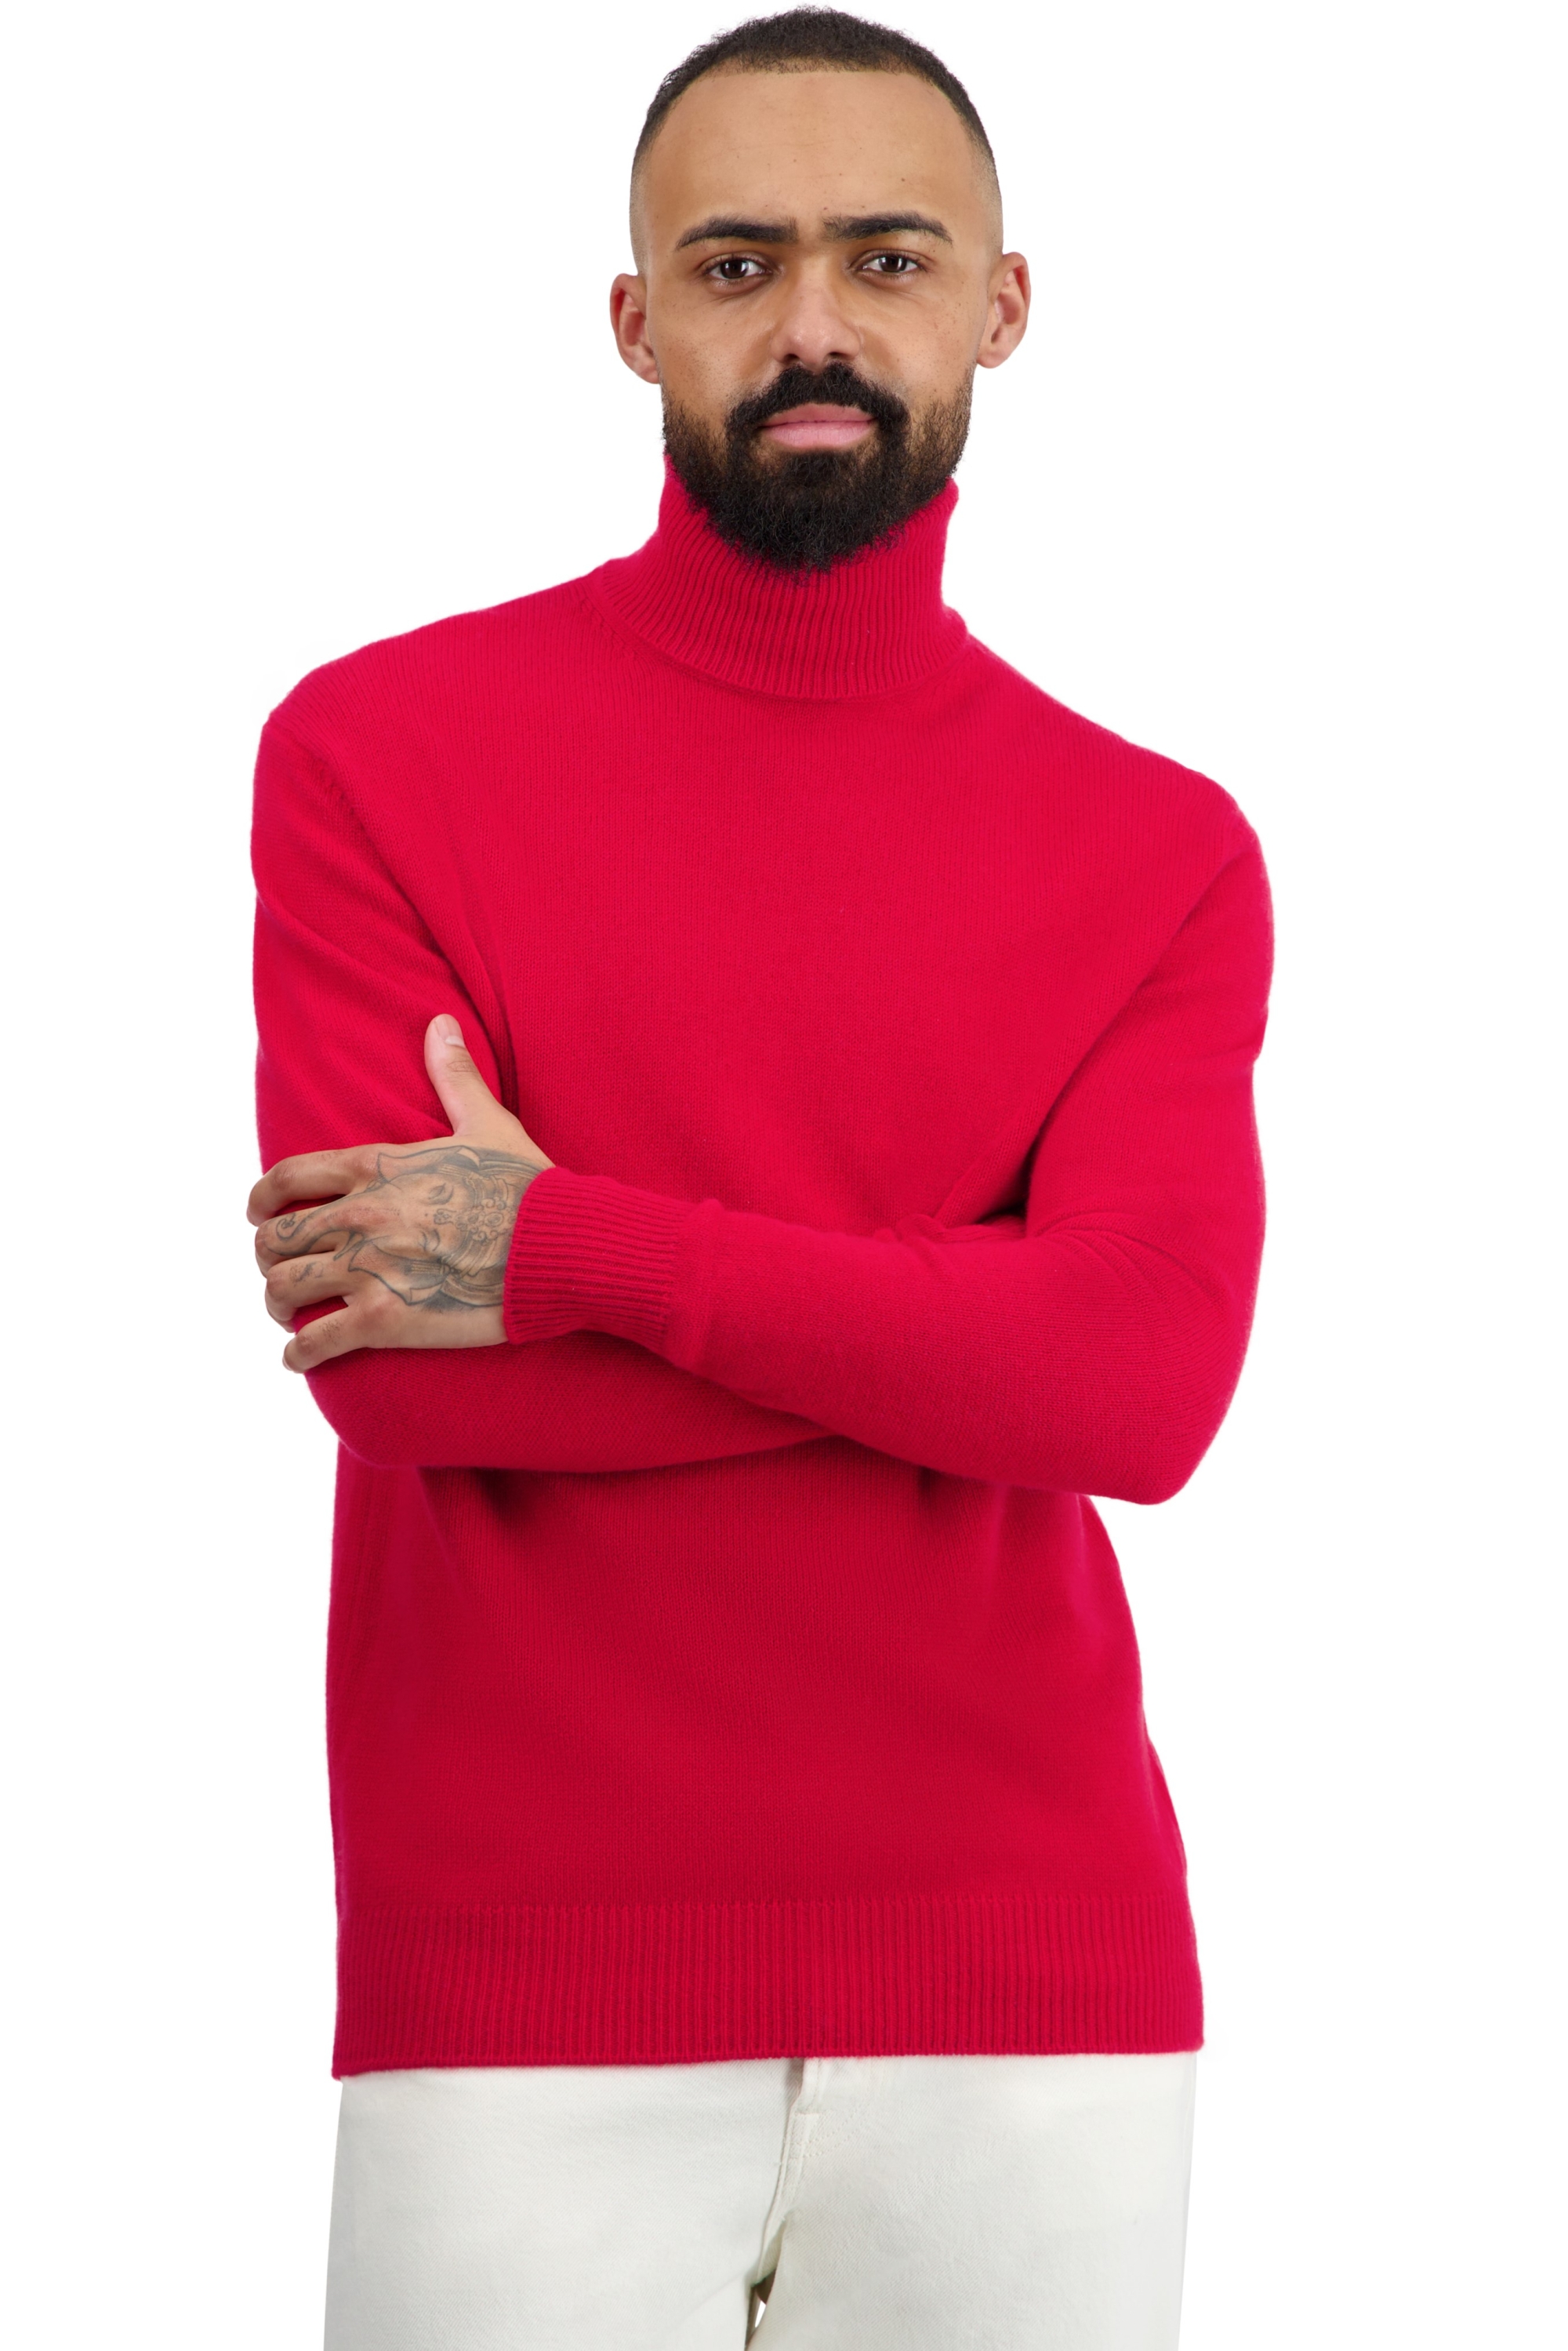 Cashmere men chunky sweater edgar 4f rouge 3xl